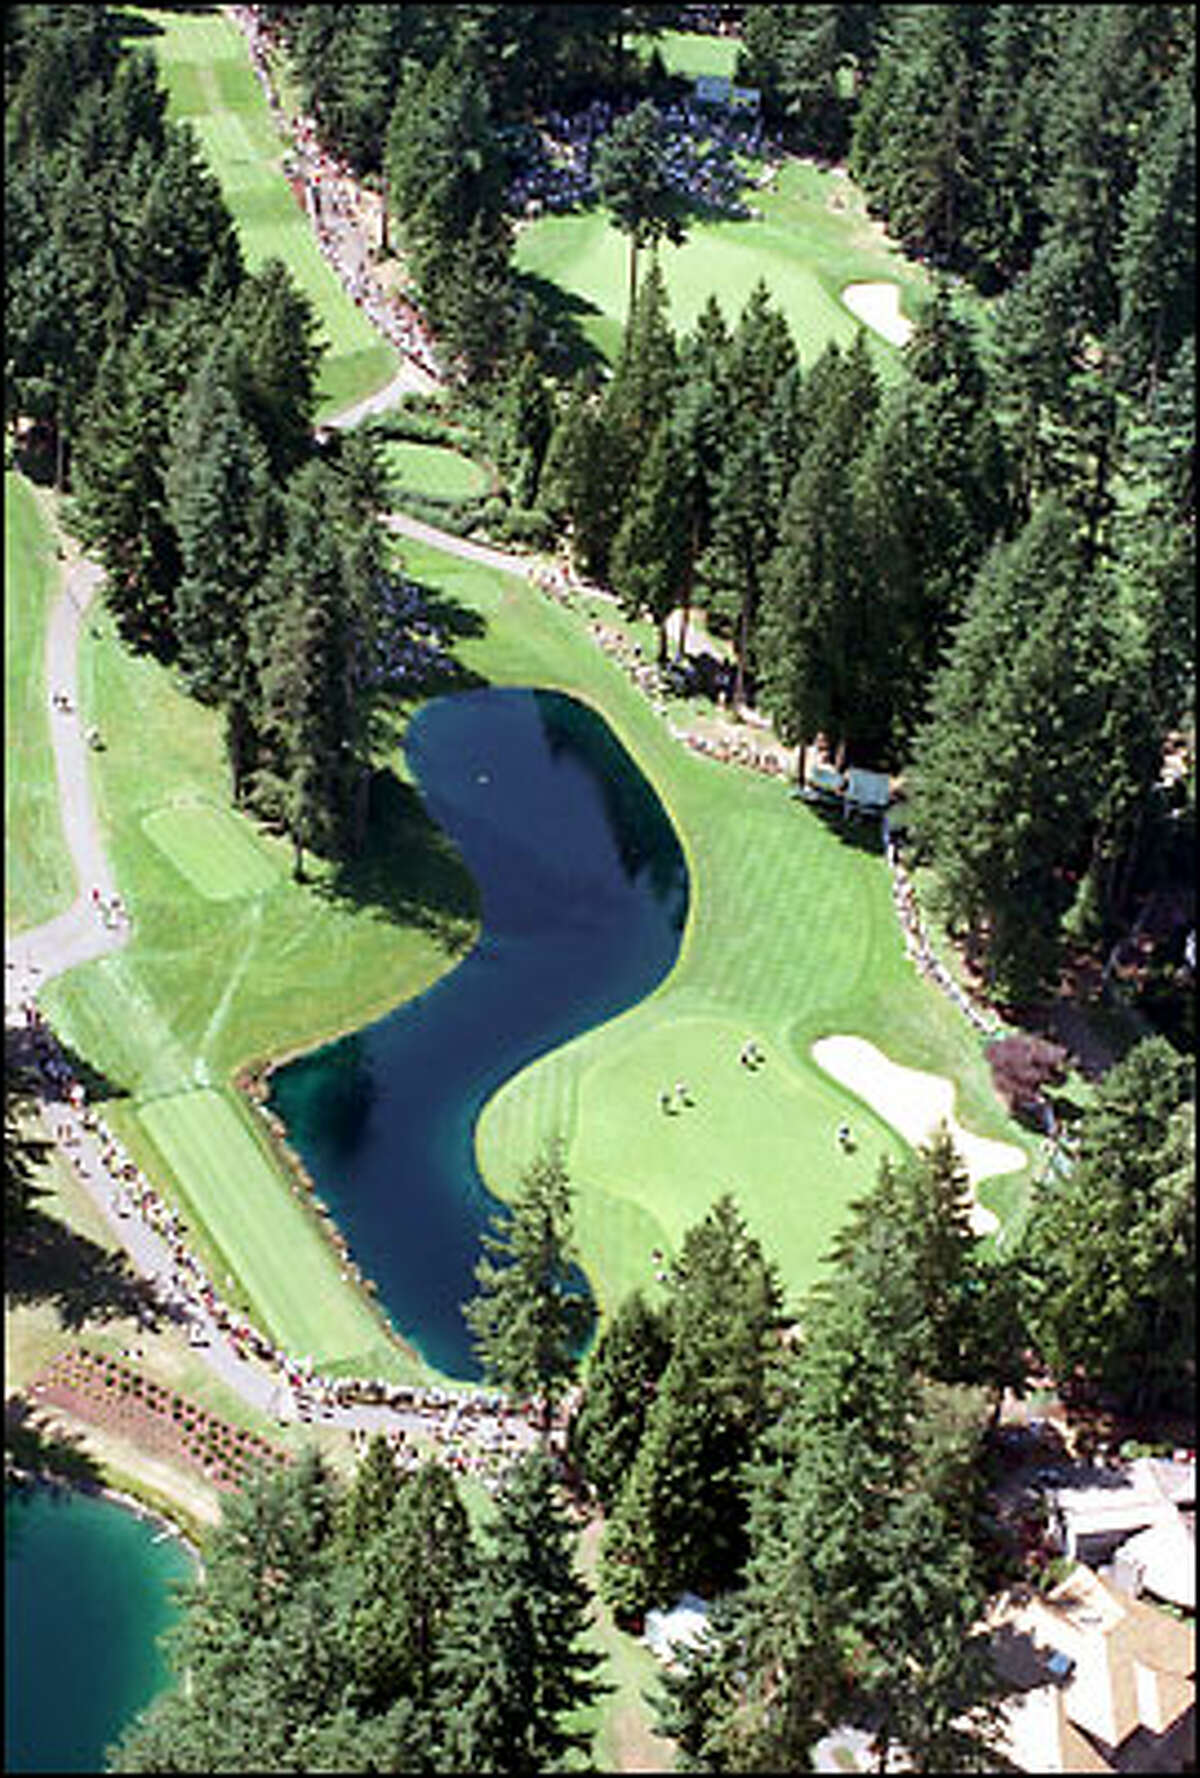 Tree-lined Sahalee Country Club is perhaps the tightest course PGA Tour players will encounter.